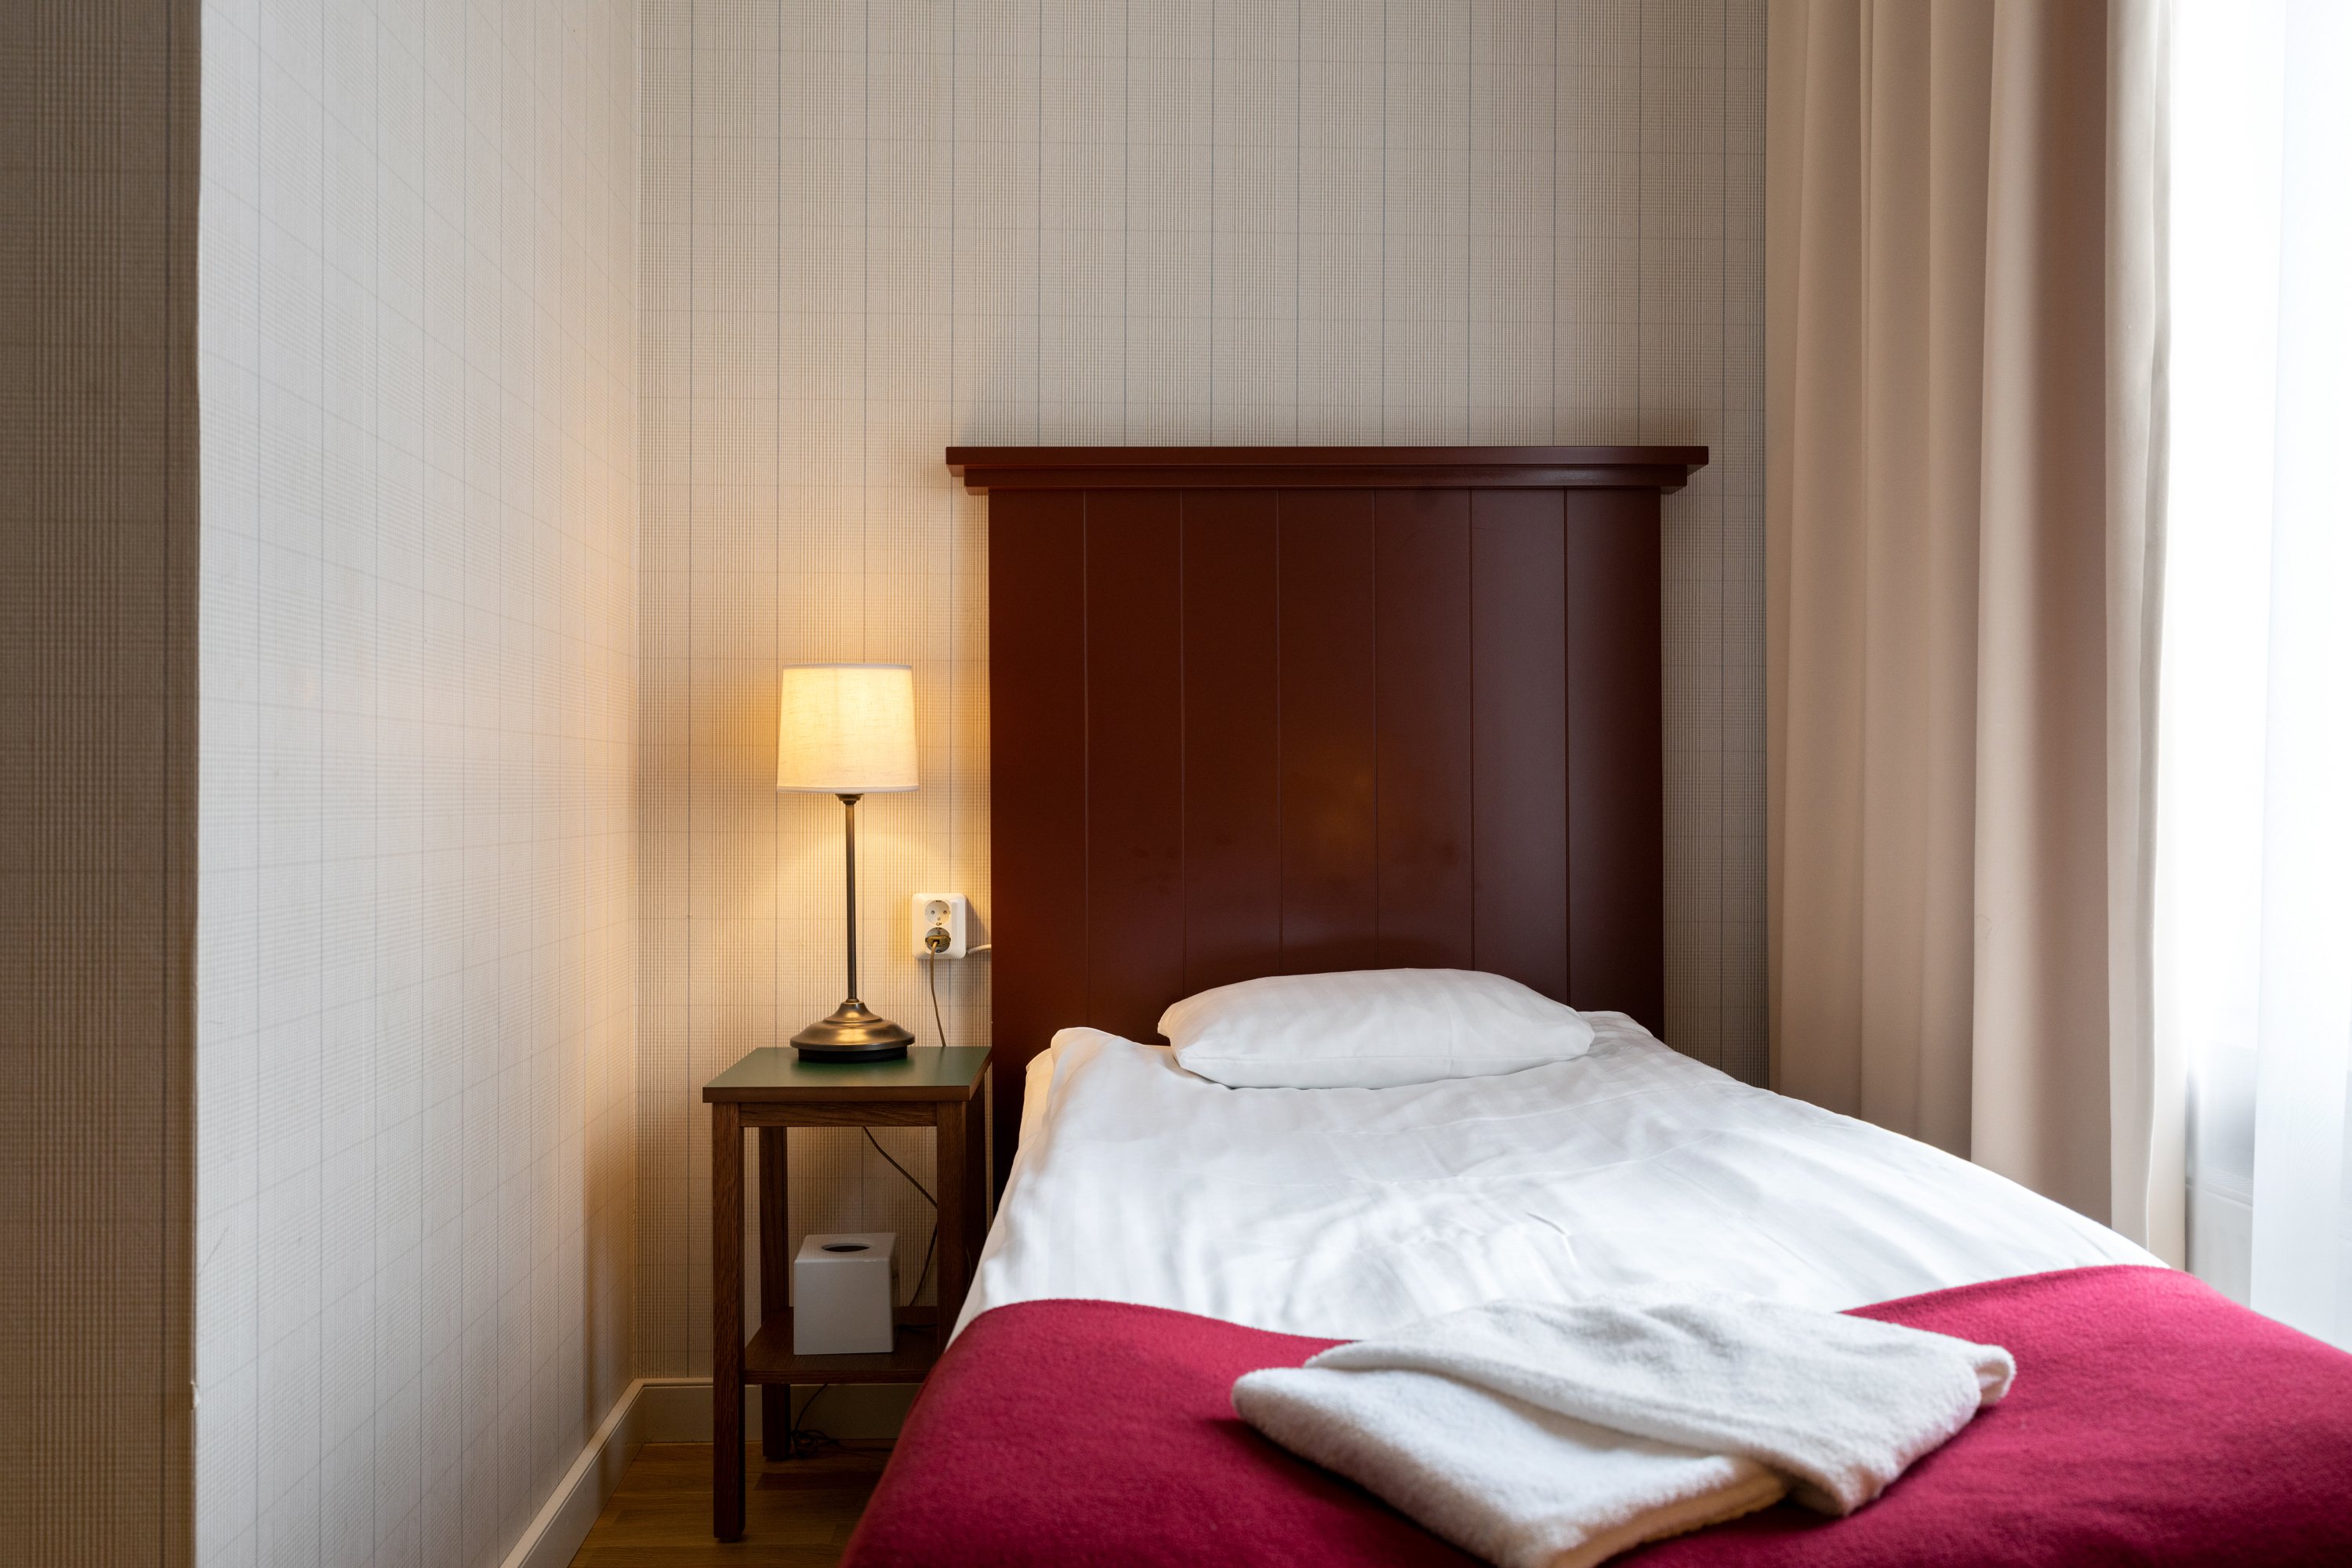 Cozy hotel room with bed, wooden headboard and bedside lamp